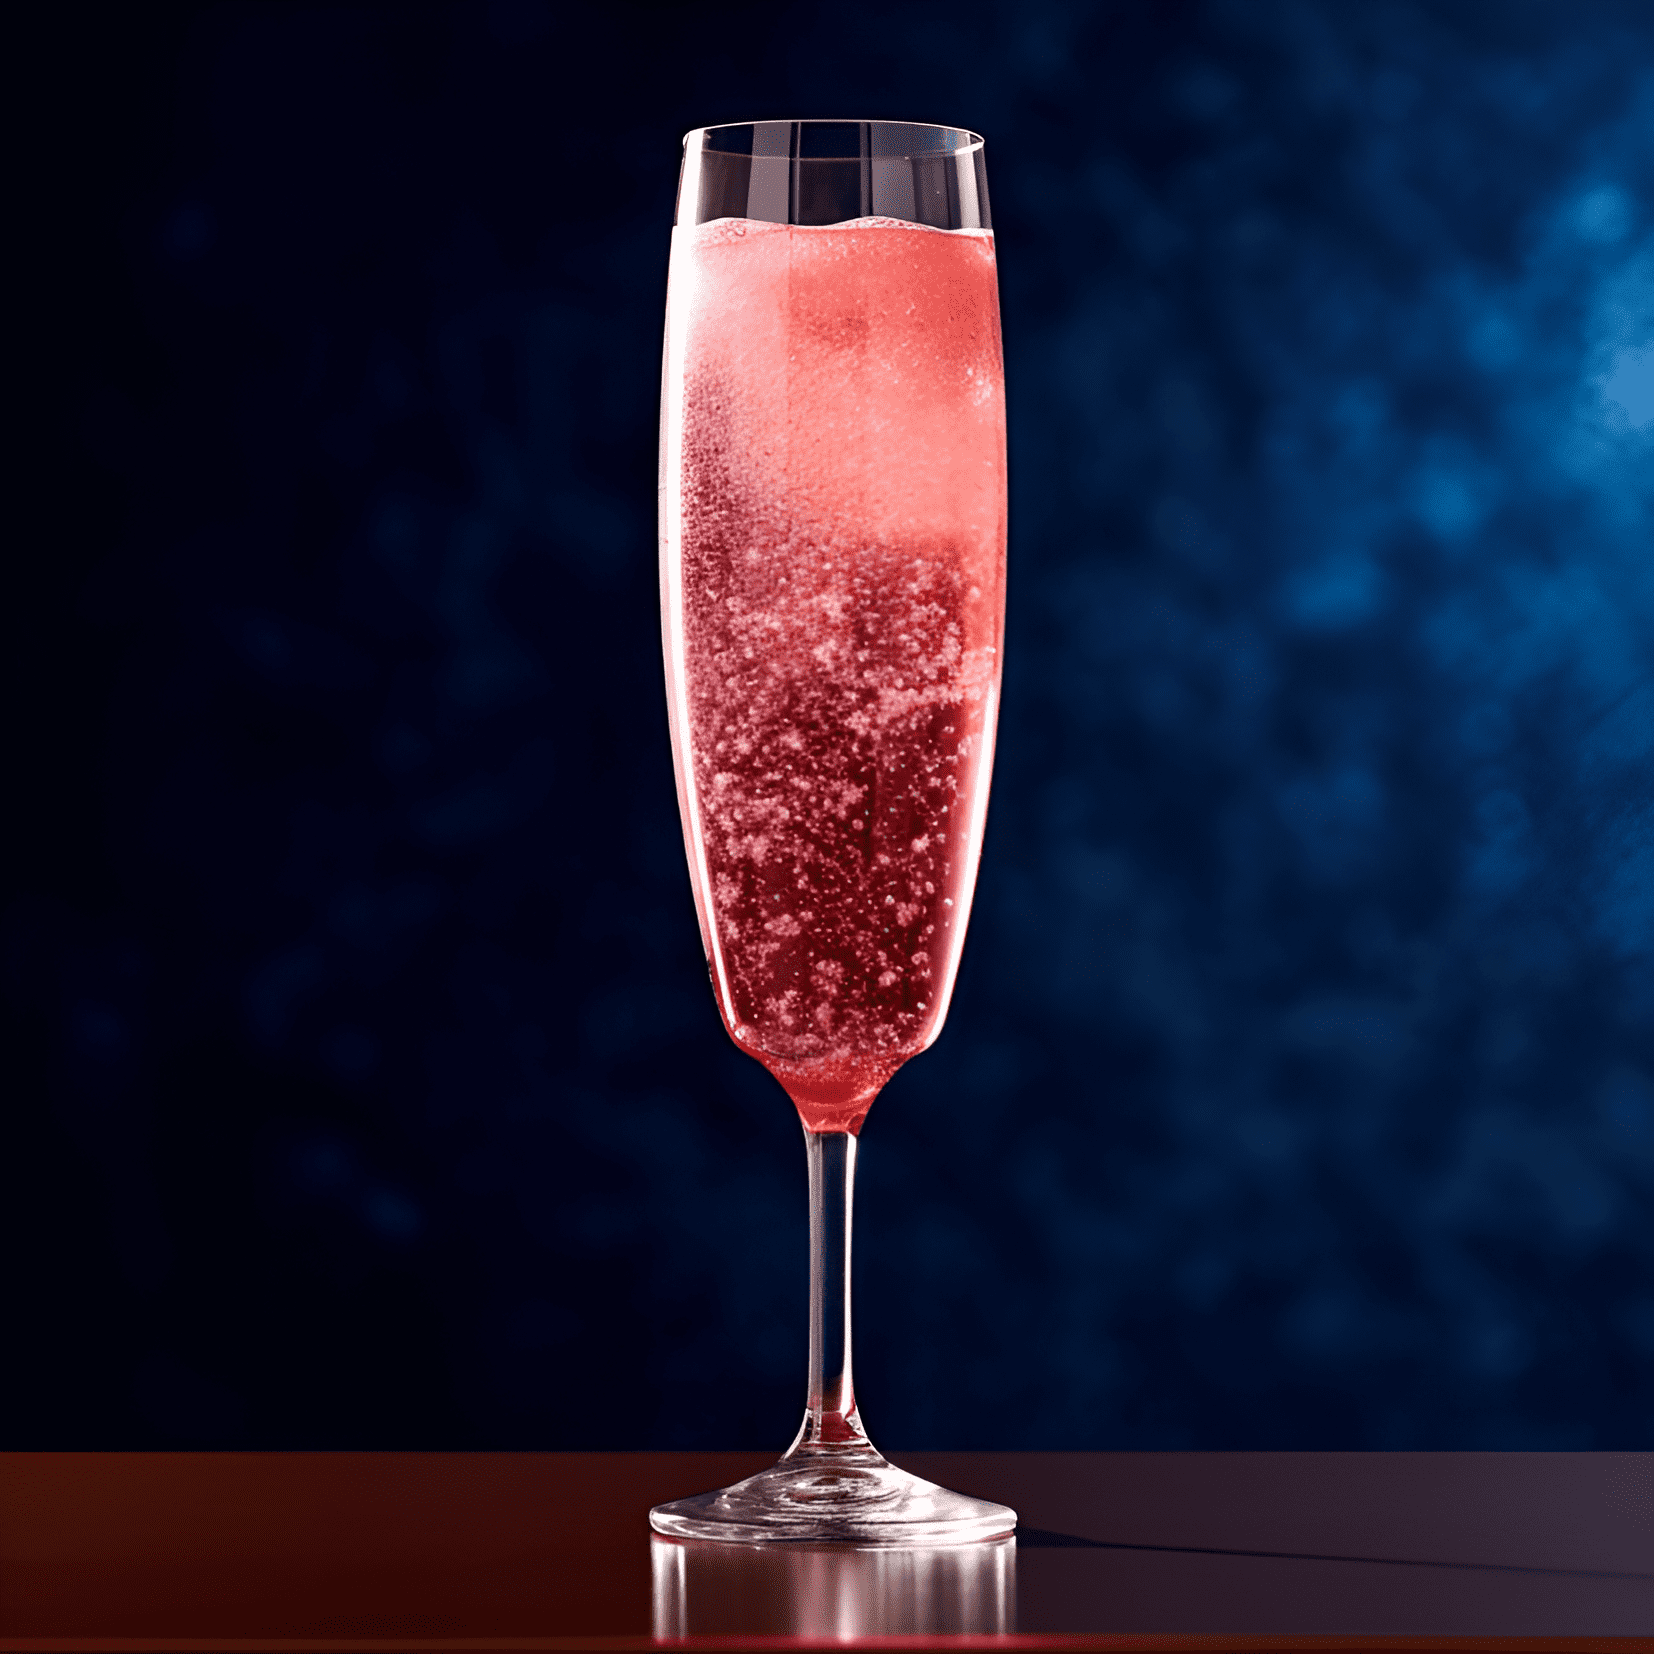 Royal Blush Cocktail Recipe - The Royal Blush cocktail is a harmonious blend of sweet, sour, and fruity flavors. The base of gin provides a strong, yet smooth foundation, while the addition of lemon juice and grenadine adds a refreshing tanginess. The champagne topper gives the drink a delightful effervescence and a touch of elegance.